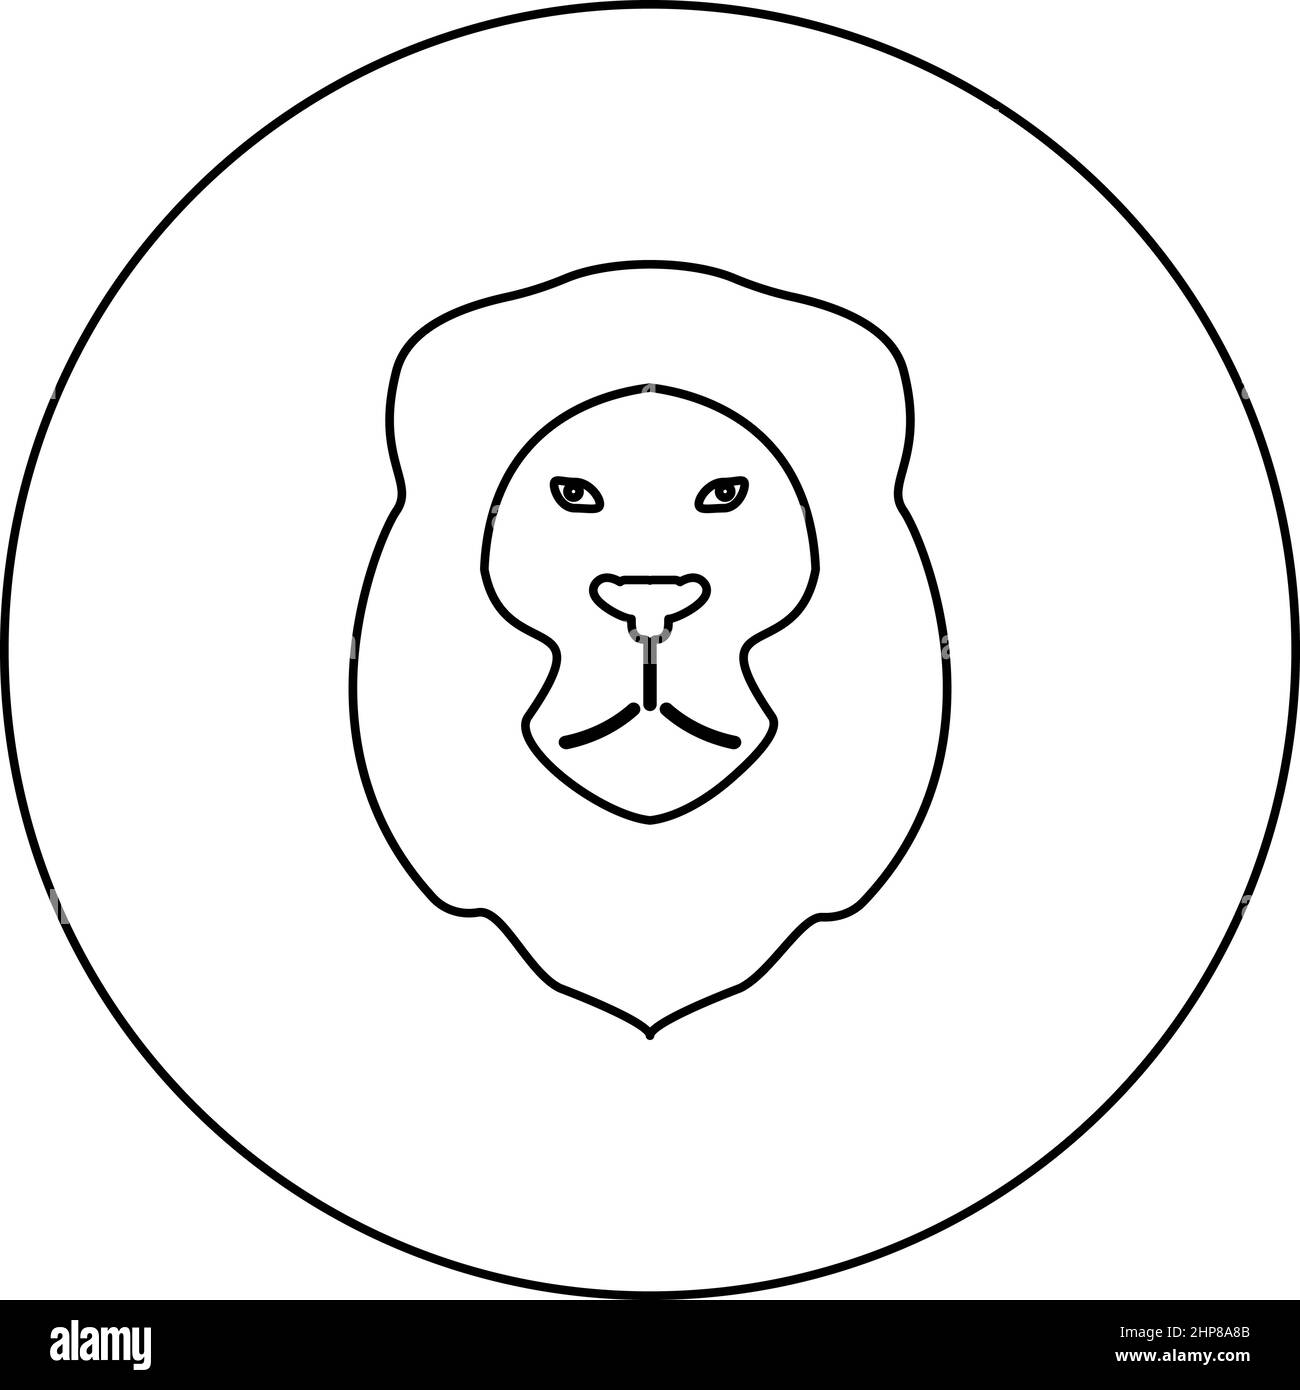 Lion Animal Wild cat head icon in circle round black color vector illustration image outline contour line thin style Stock Vector